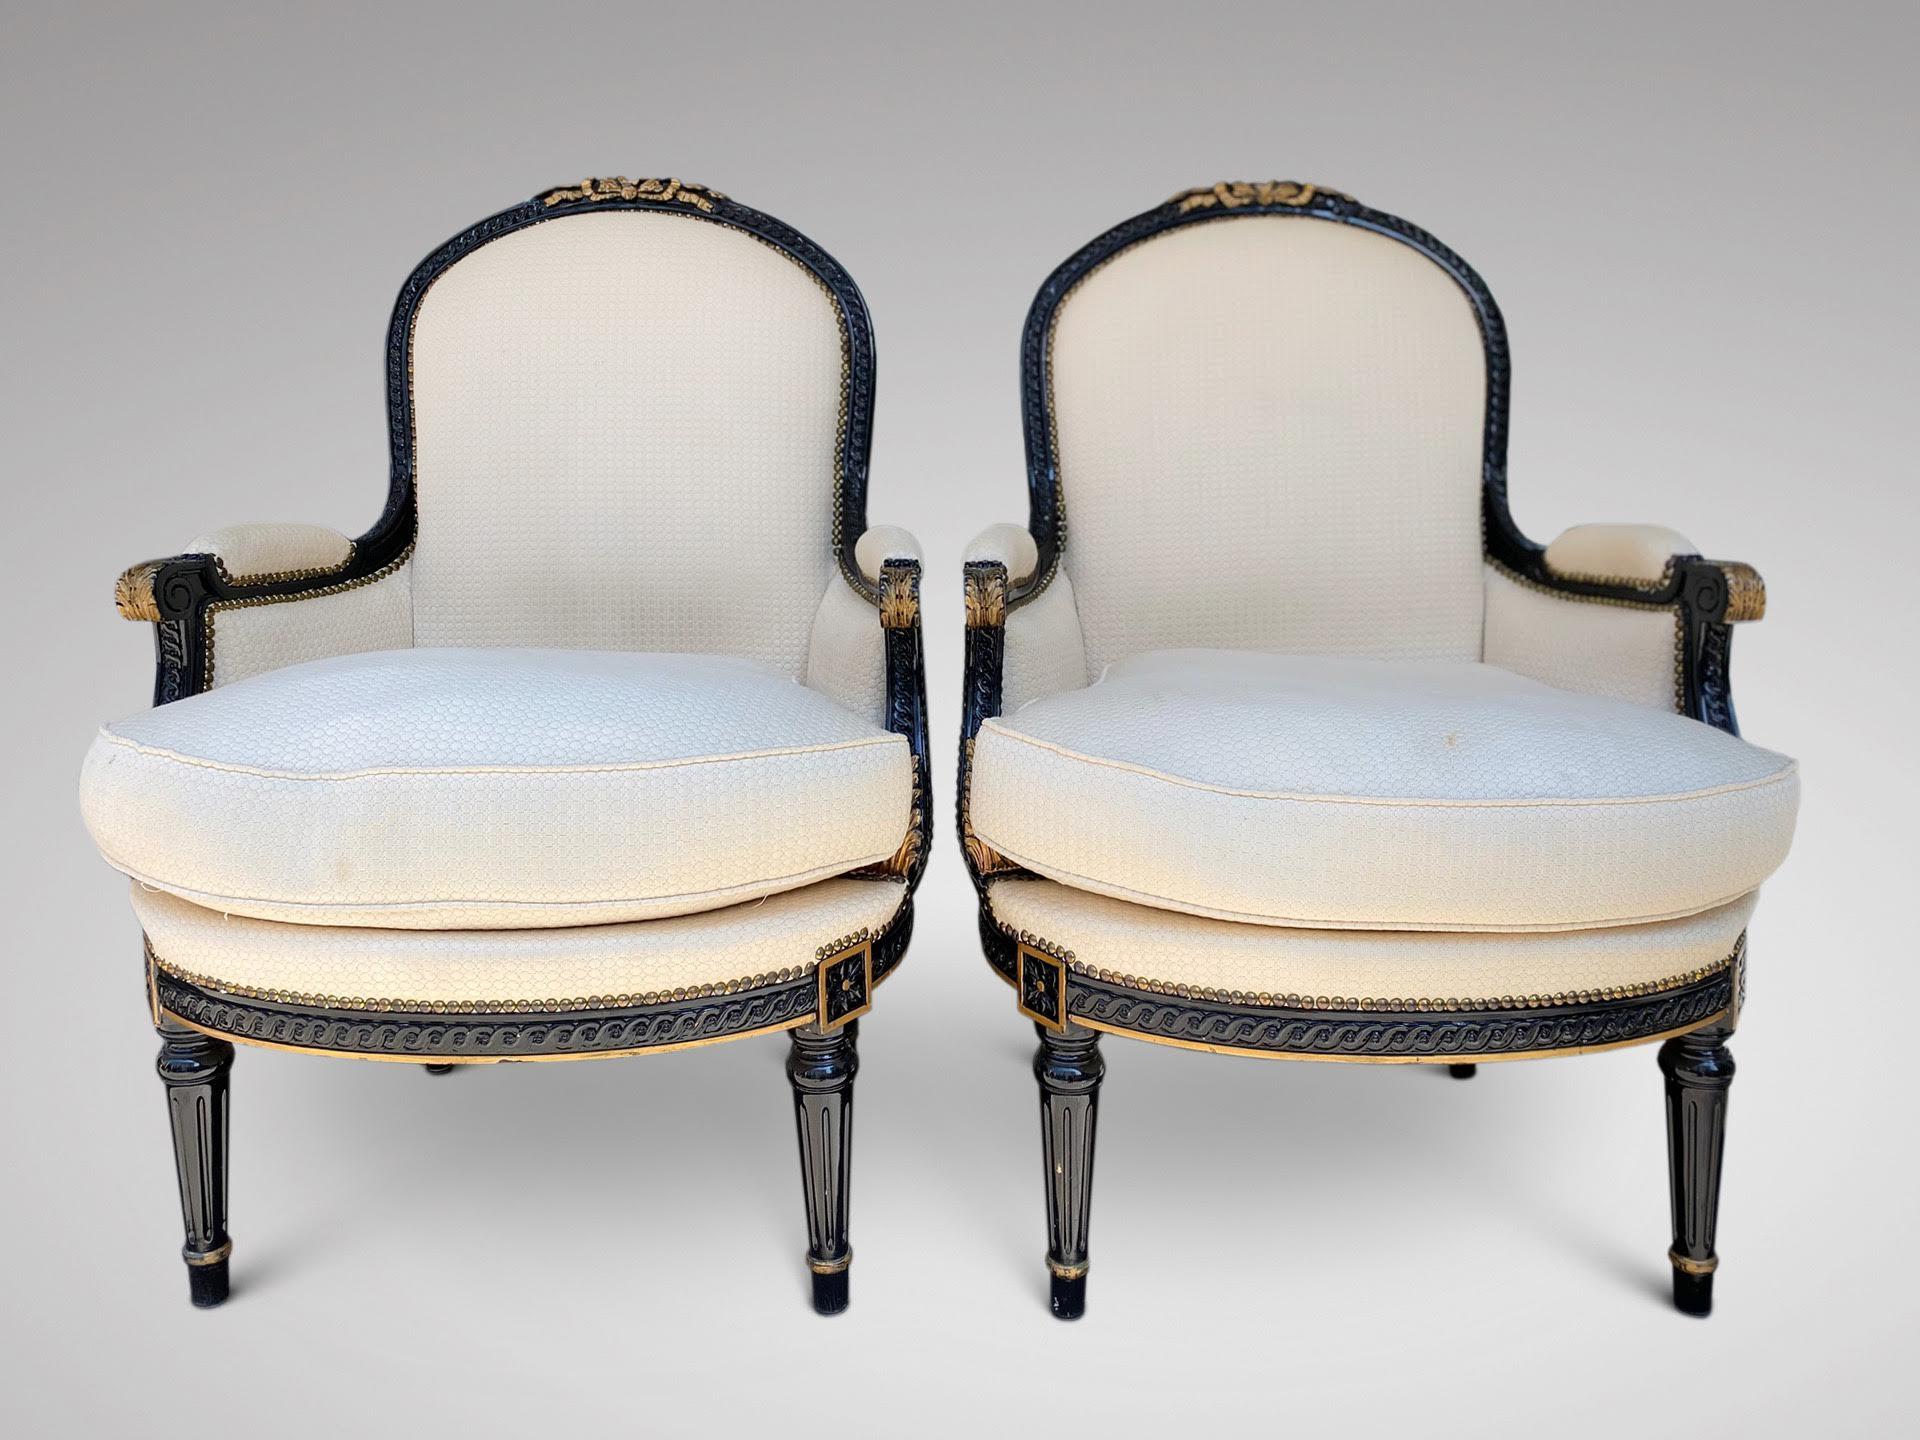 A pair of late 19th century French Louis XVI bergères. Ebonised and gilded finish to the wood, upholstered in a white and gild fabric with feather-stuffed seat cushion, sides and back in a blue purple fabric. Nice proportions and very comfortable in